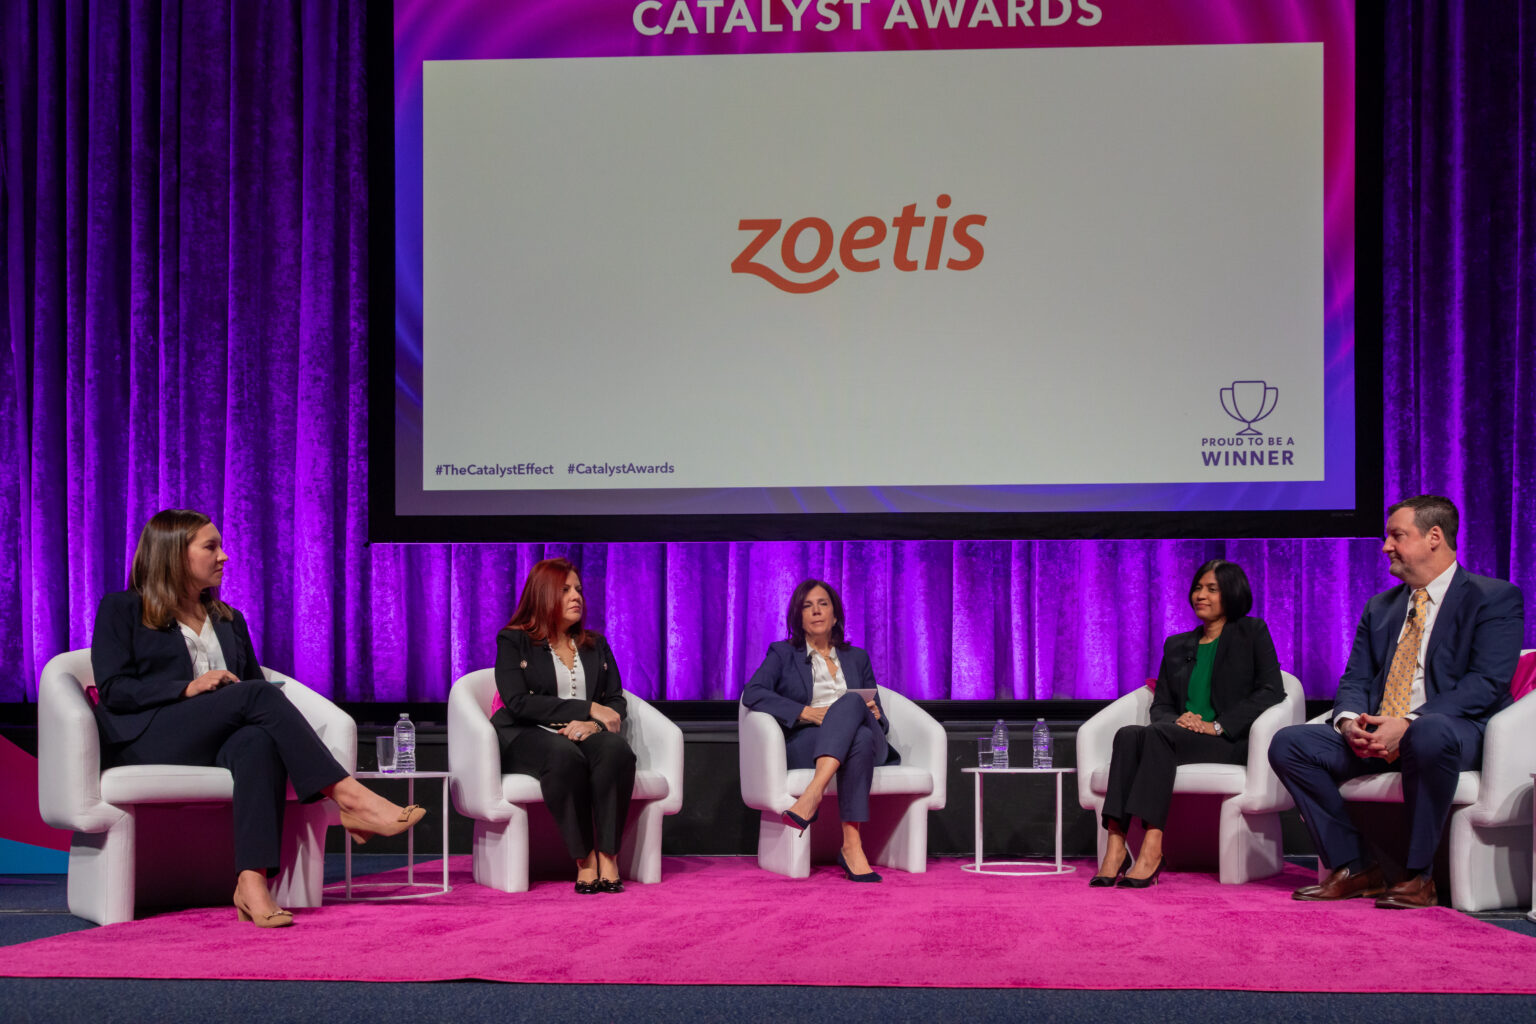 Leaders from Zoetis, Catalyst Award Winner sit on stage to discuss DEI best practices.